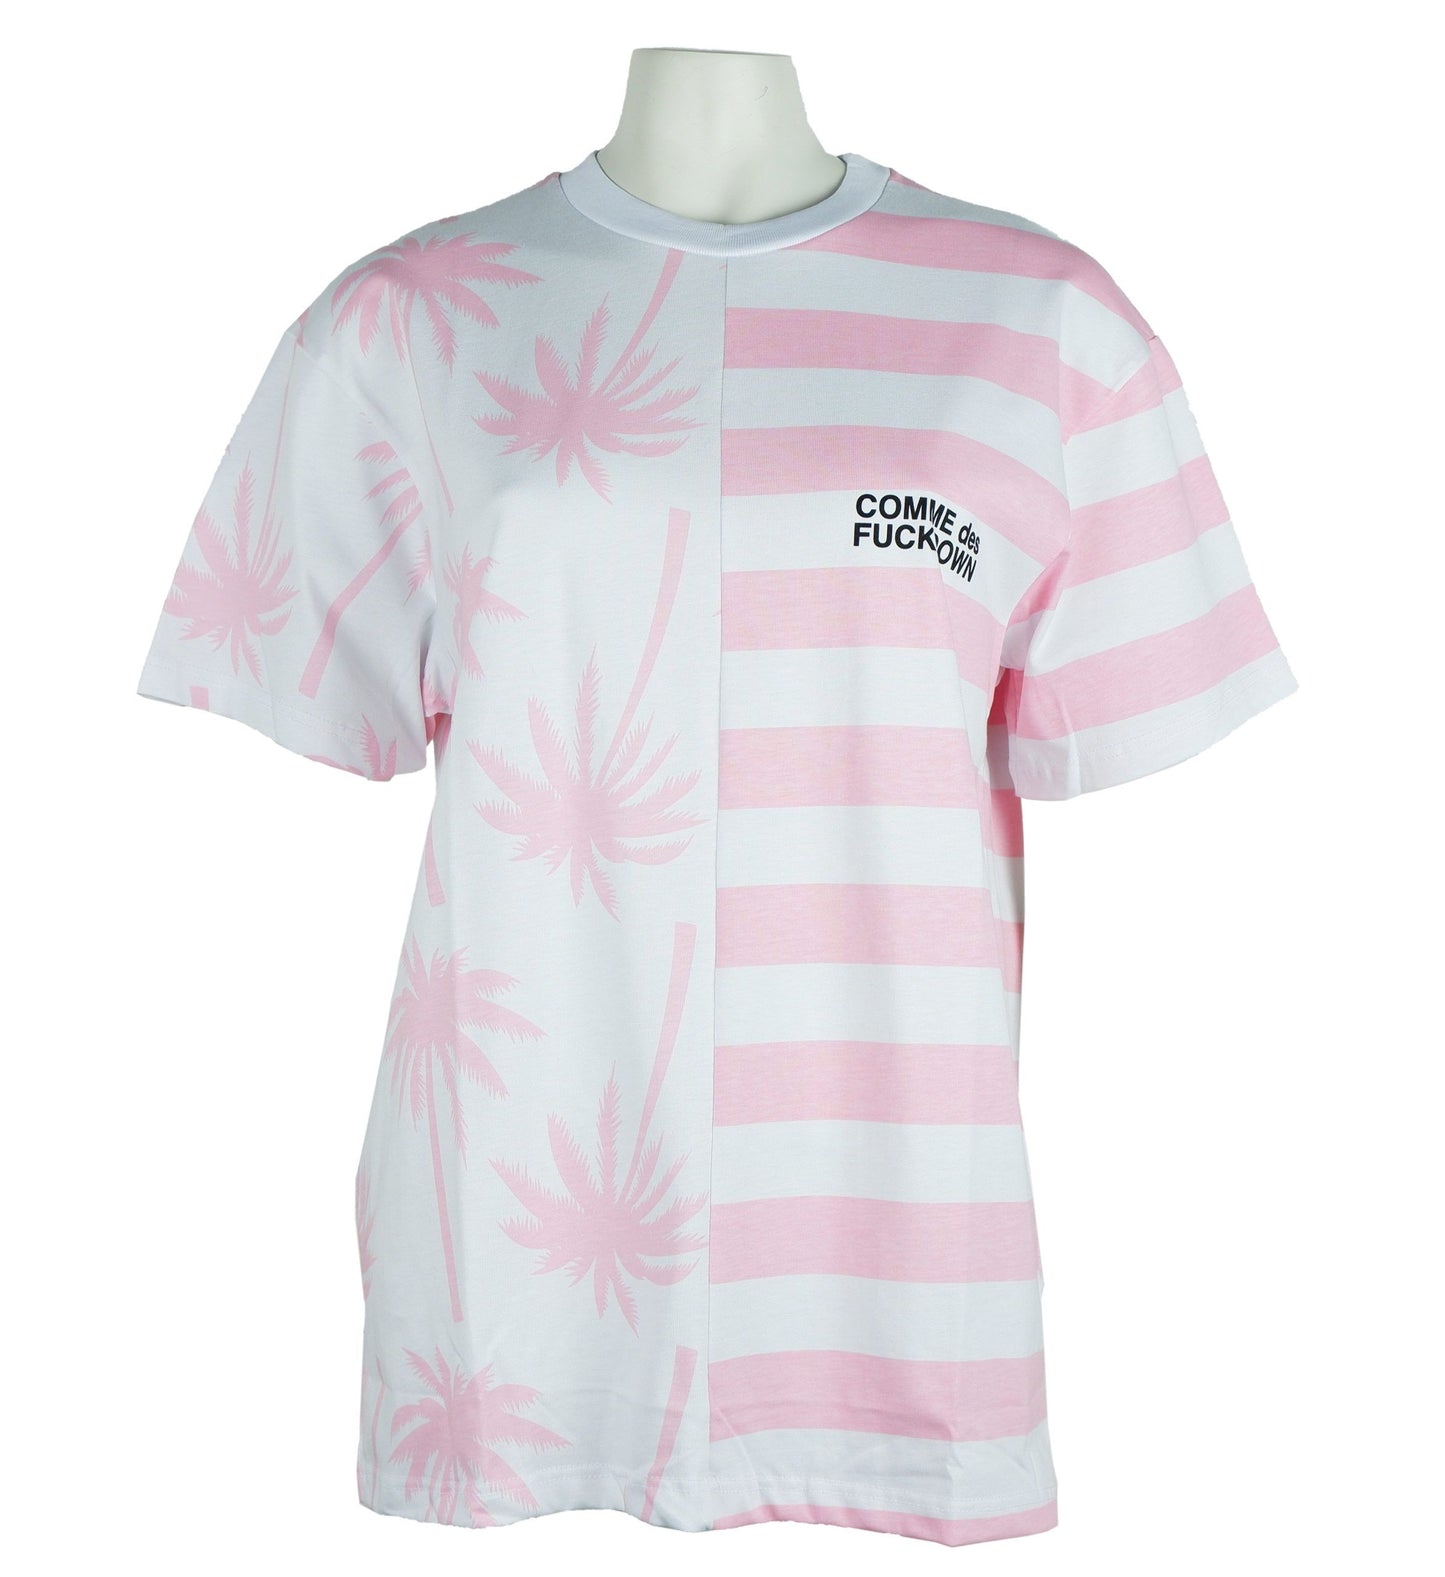 Chic Pink Striped Cotton Tee with Palm Motif